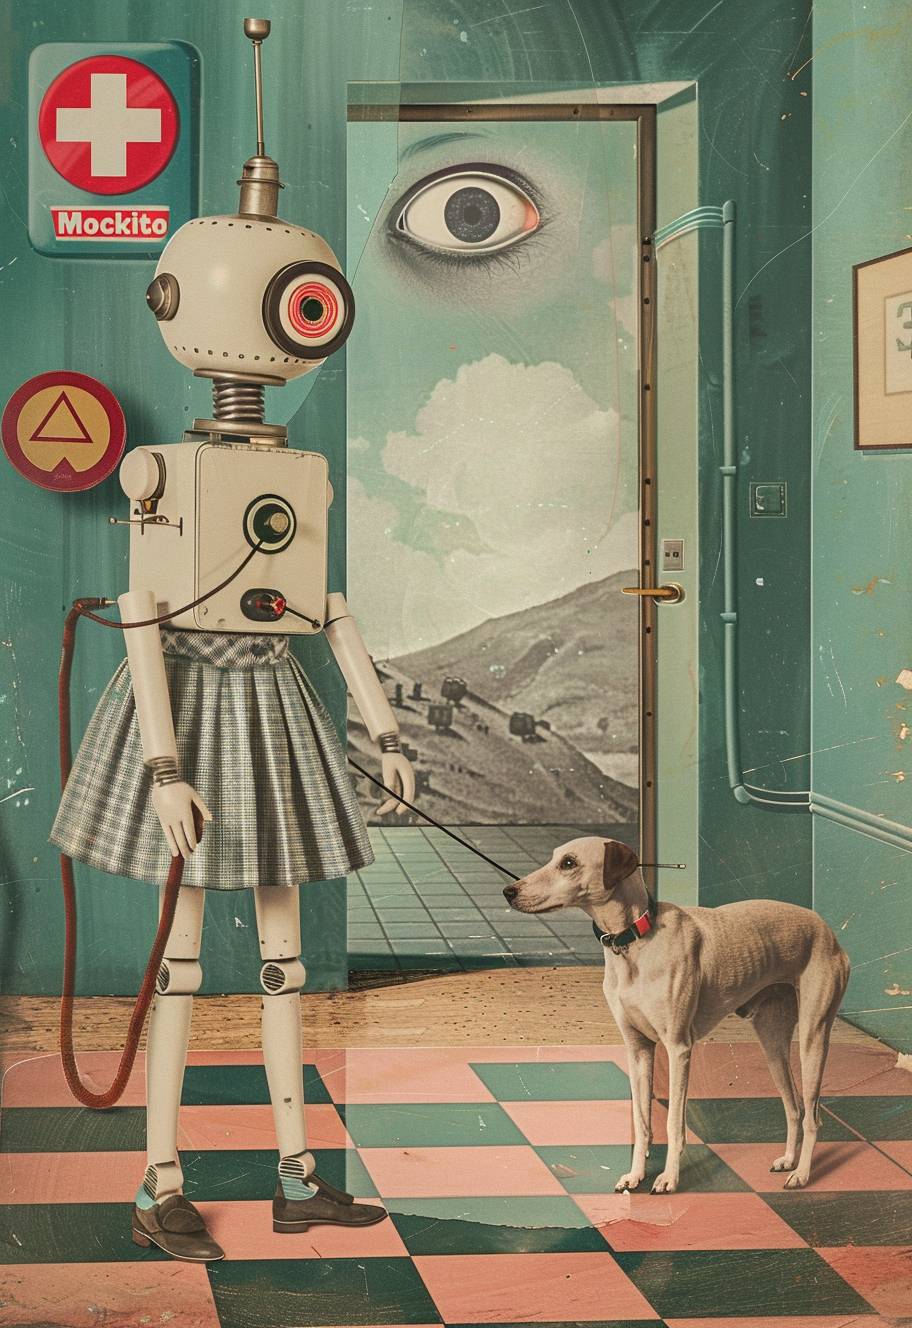 Surrealistic cut and paste collage in the style of Wes Anderson depicting a female robot with one large eye wearing a skirt standing on a checkered floor holding the leash to her dog who is half robotic and half natural looking animal in an old green hospital room, with pastel colors and a red cross sign hanging from the wall behind the subject. Showing a full body view.